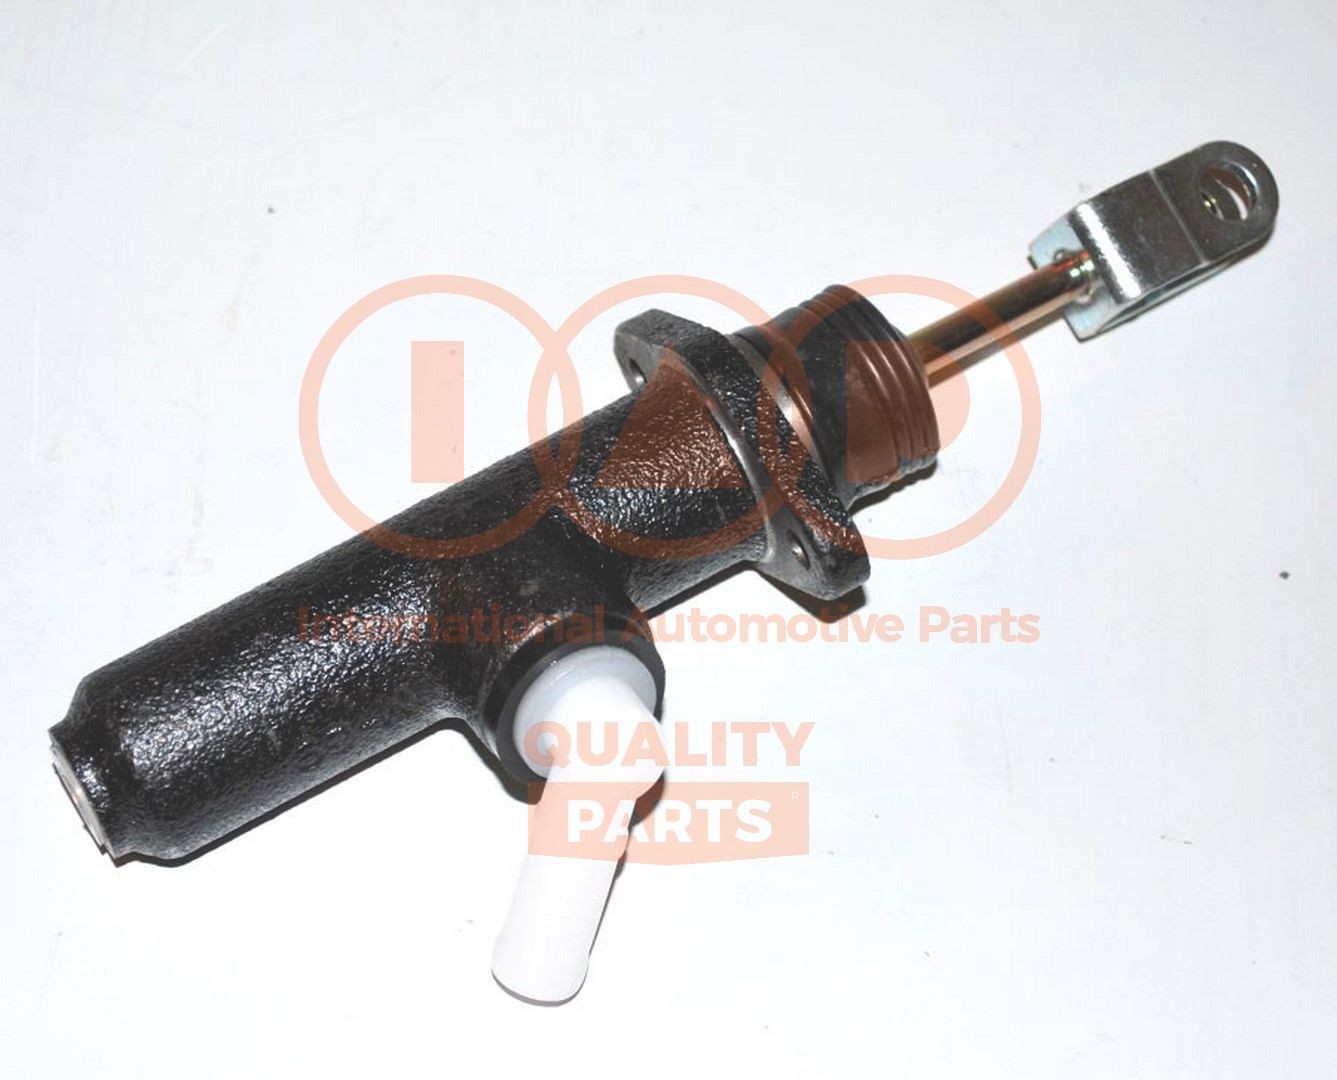 IAP QUALITY PARTS Clutch Master Cylinder 205-13075 buy